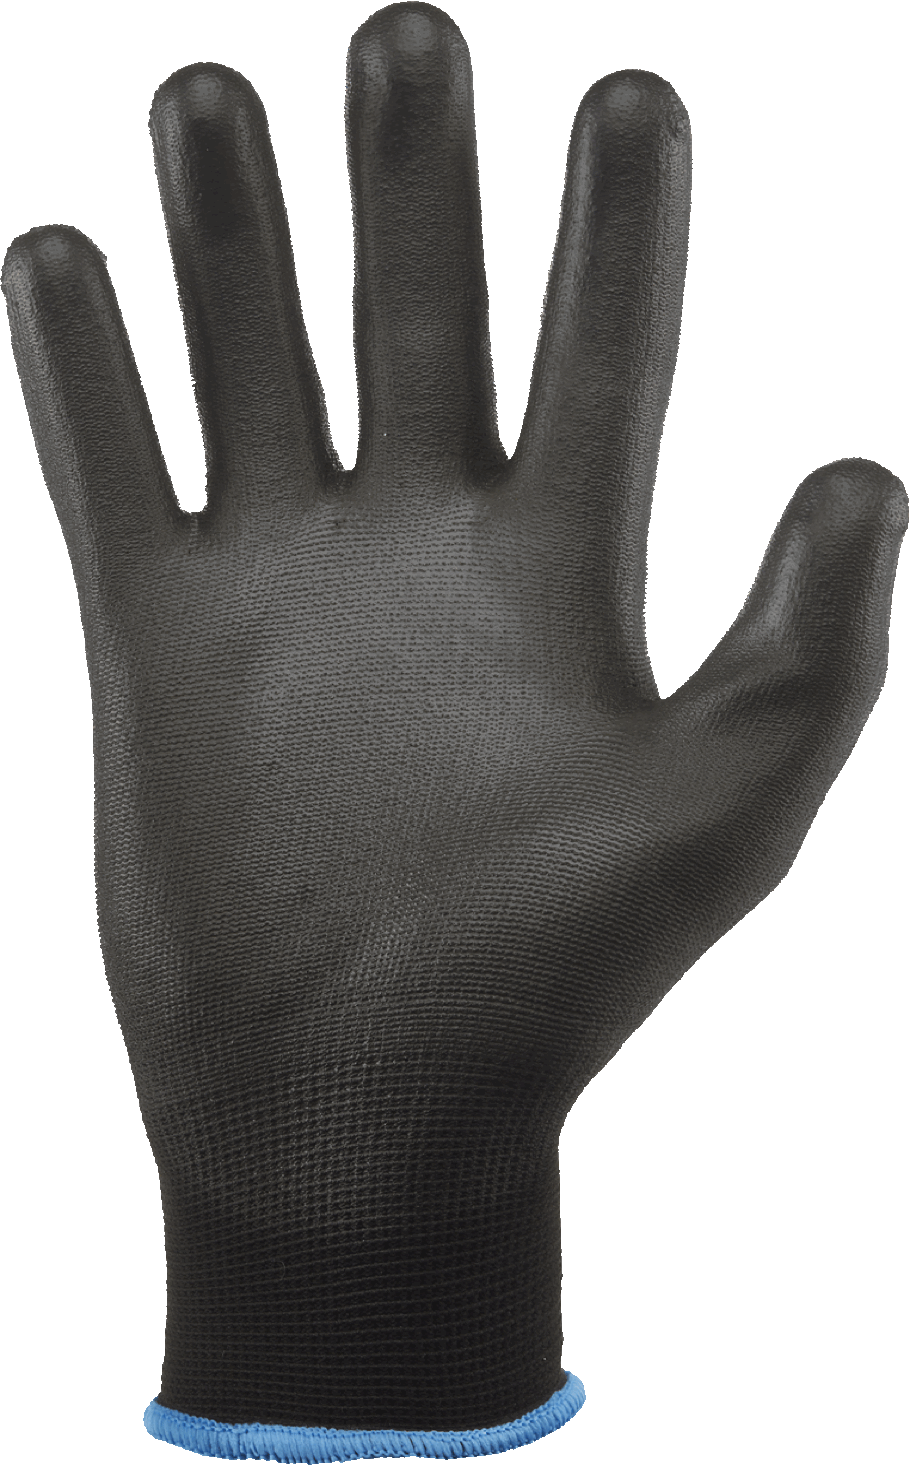 http://www.gorillagripgloves.com/wp-content/uploads/2022/04/rubber_glove_core.png